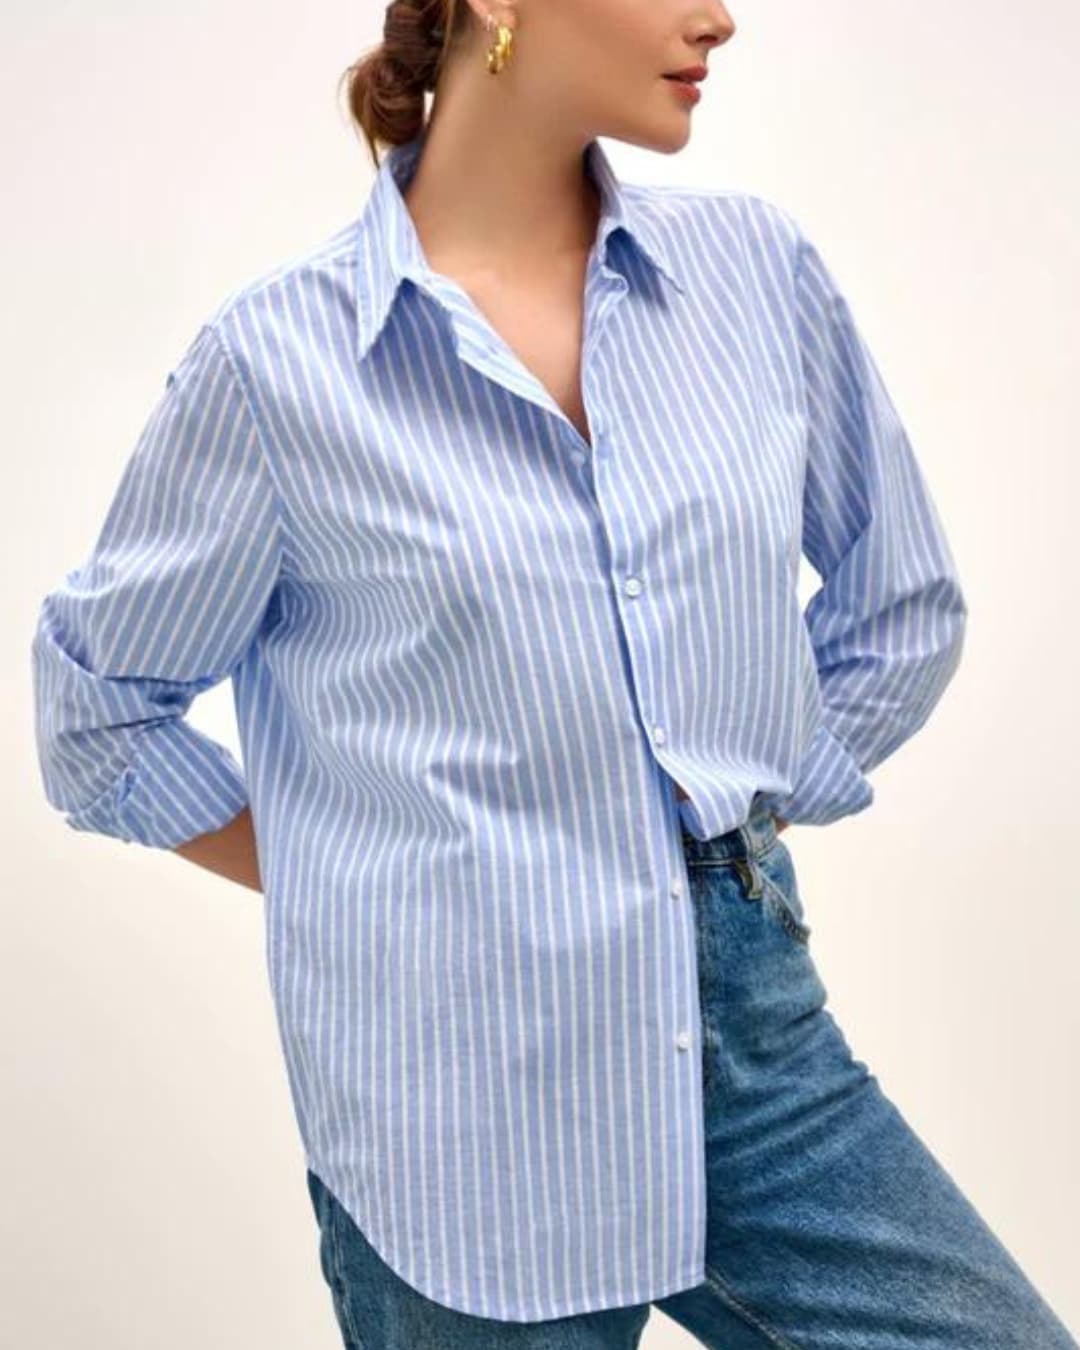 Spring Capsule Wardroble Striped Shirt Style